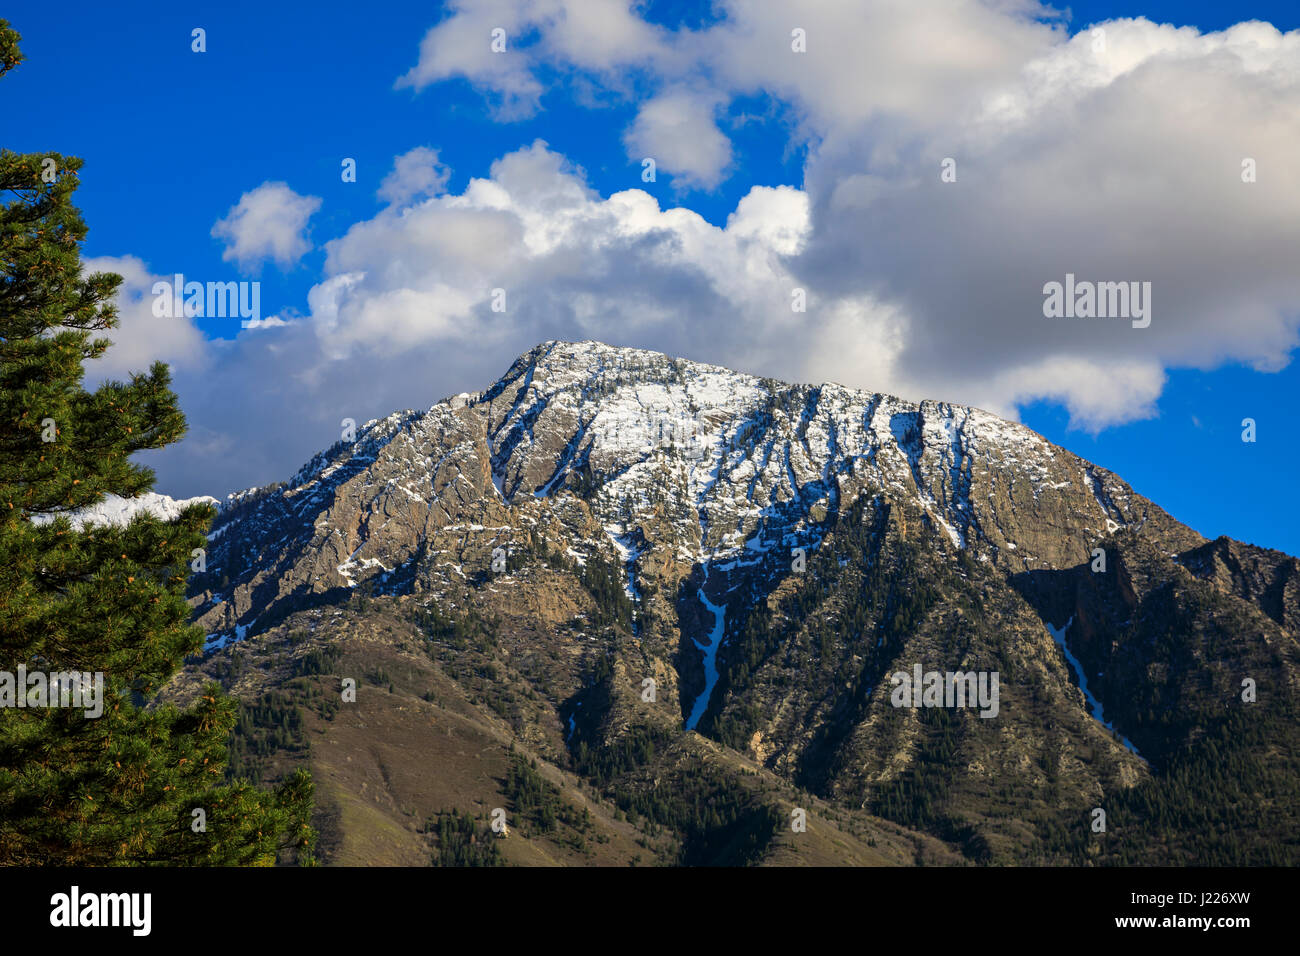 This is a view of Mount Olympus, a landmark mountain on the east side of the Salt Lake Utah, Utah, USA. Stock Photo